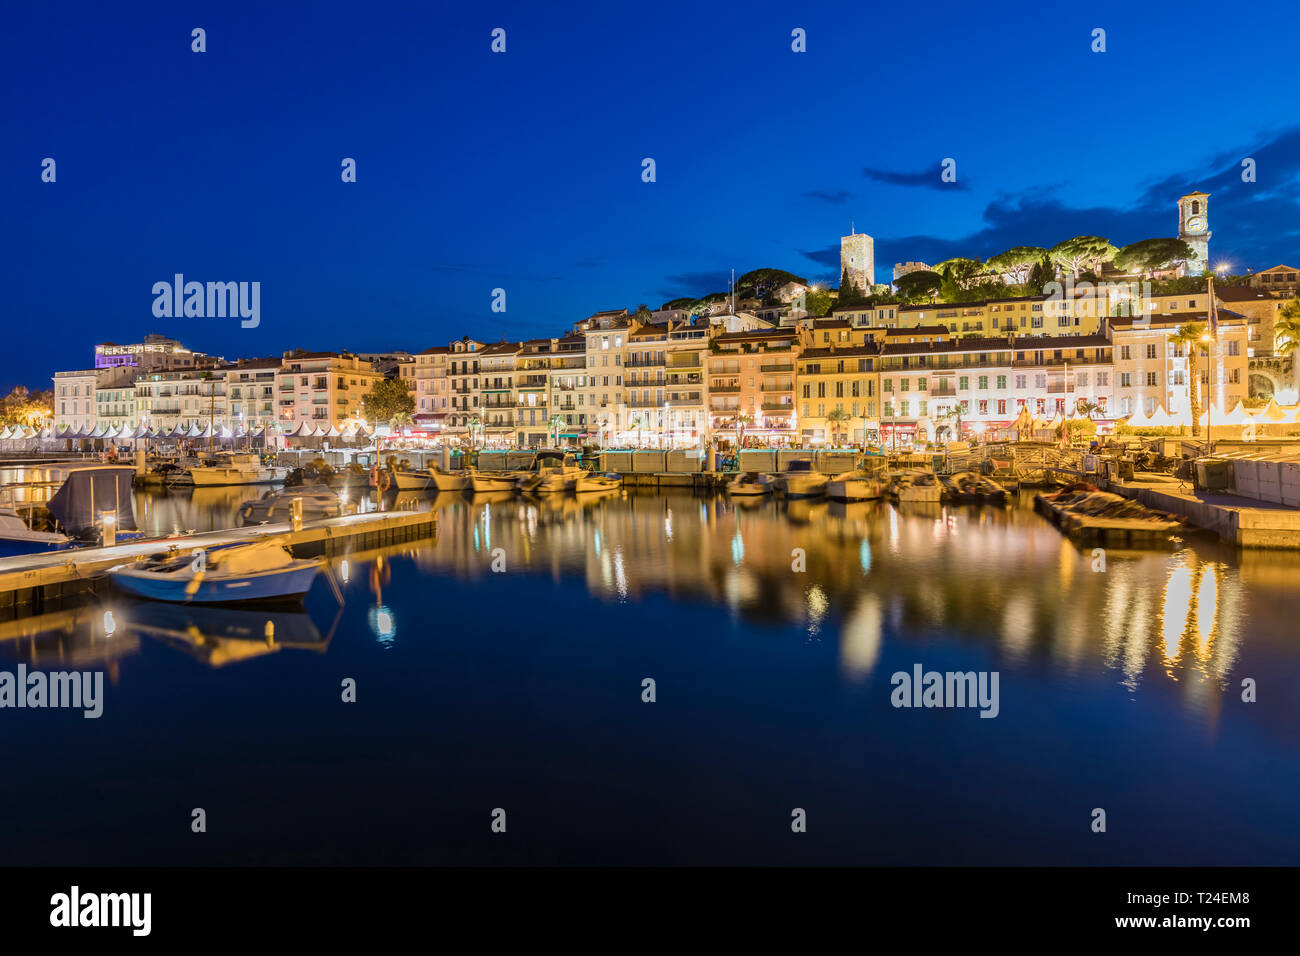 France, Provence-Alpes-Cote d'Azur, Cannes, Le Suquet, Old town, Fishing harbour in the evening Stock Photo